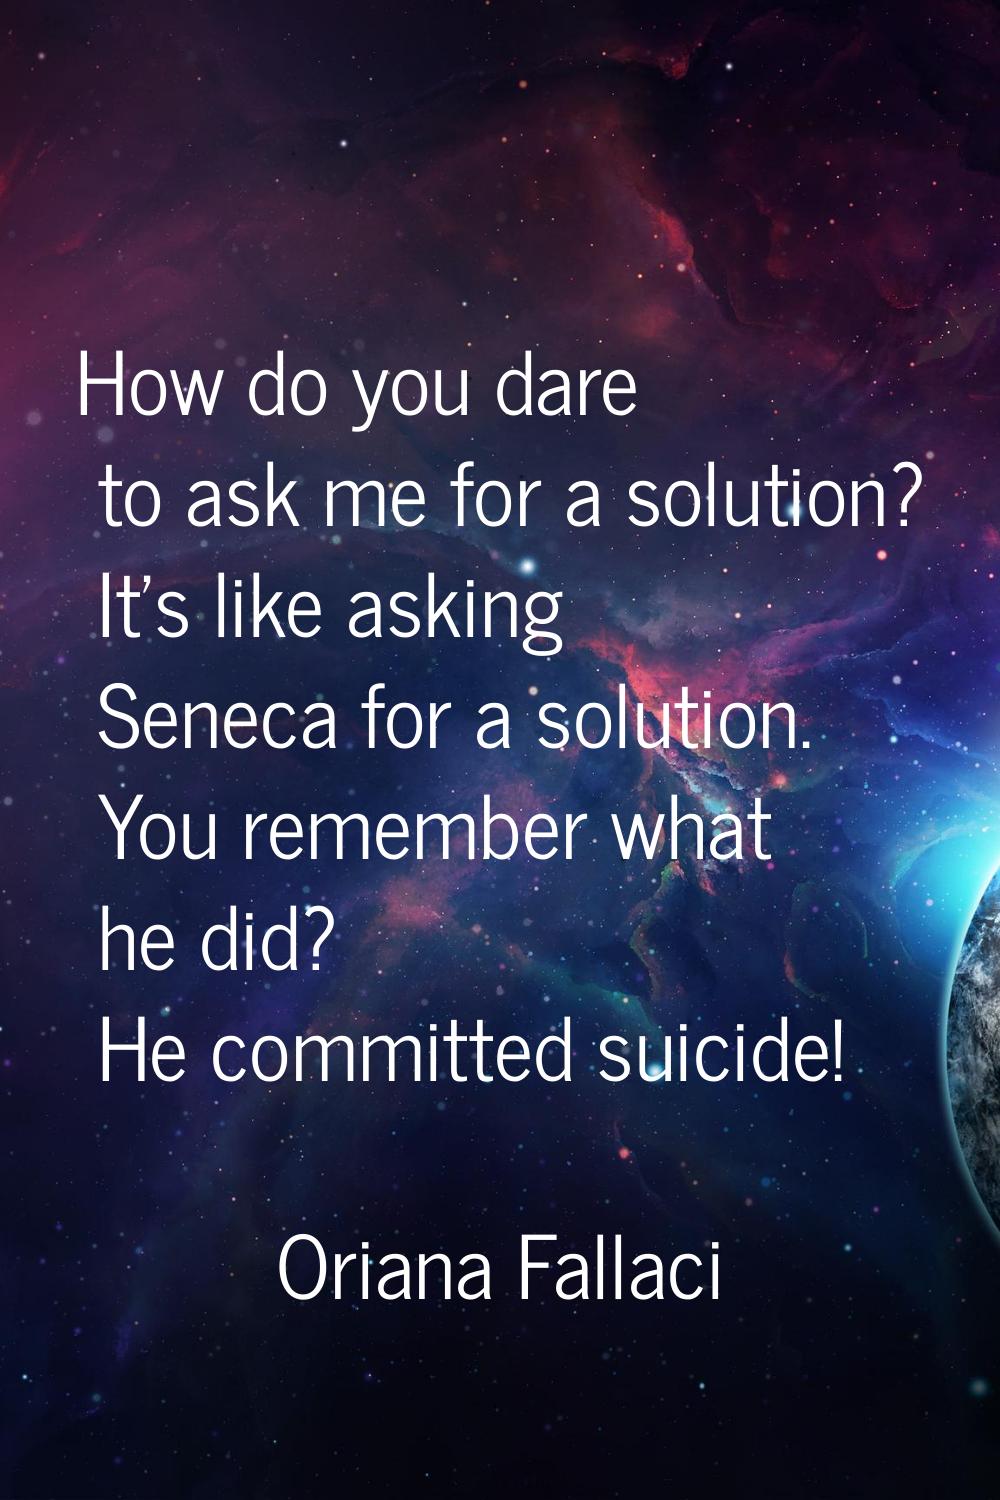 How do you dare to ask me for a solution? It's like asking Seneca for a solution. You remember what